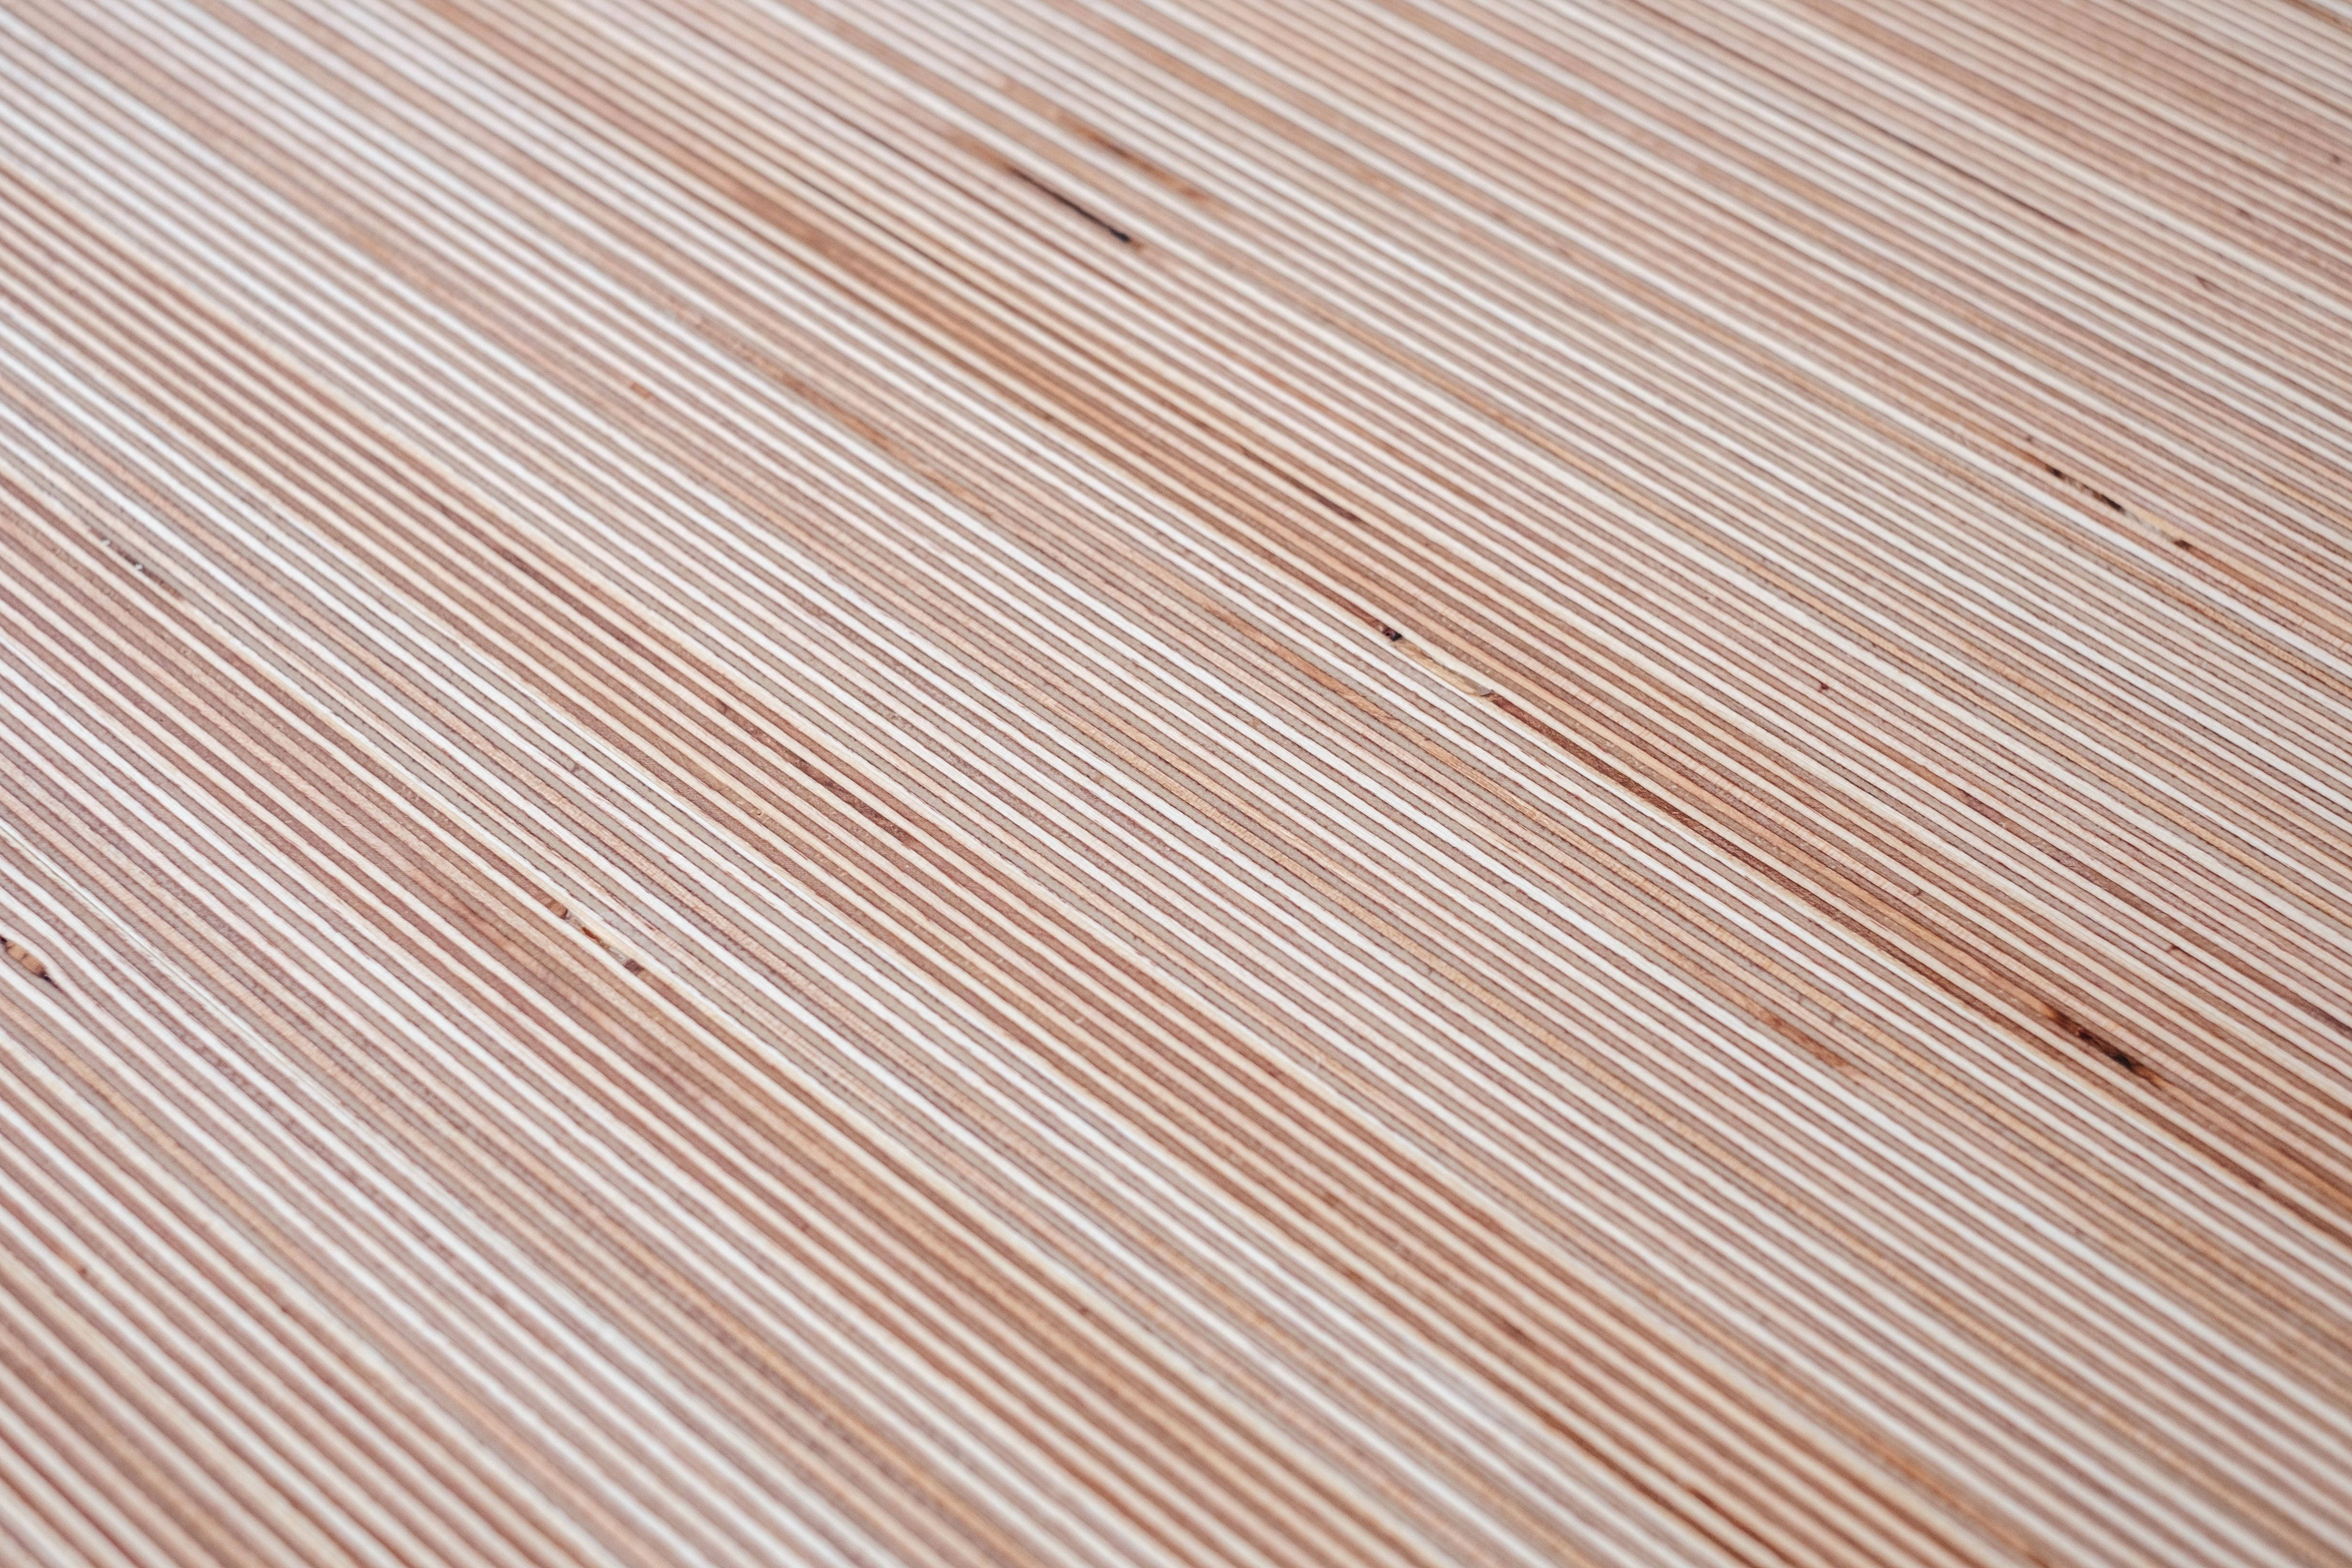 Brown Aesthetic Wood Texture Laptop Background